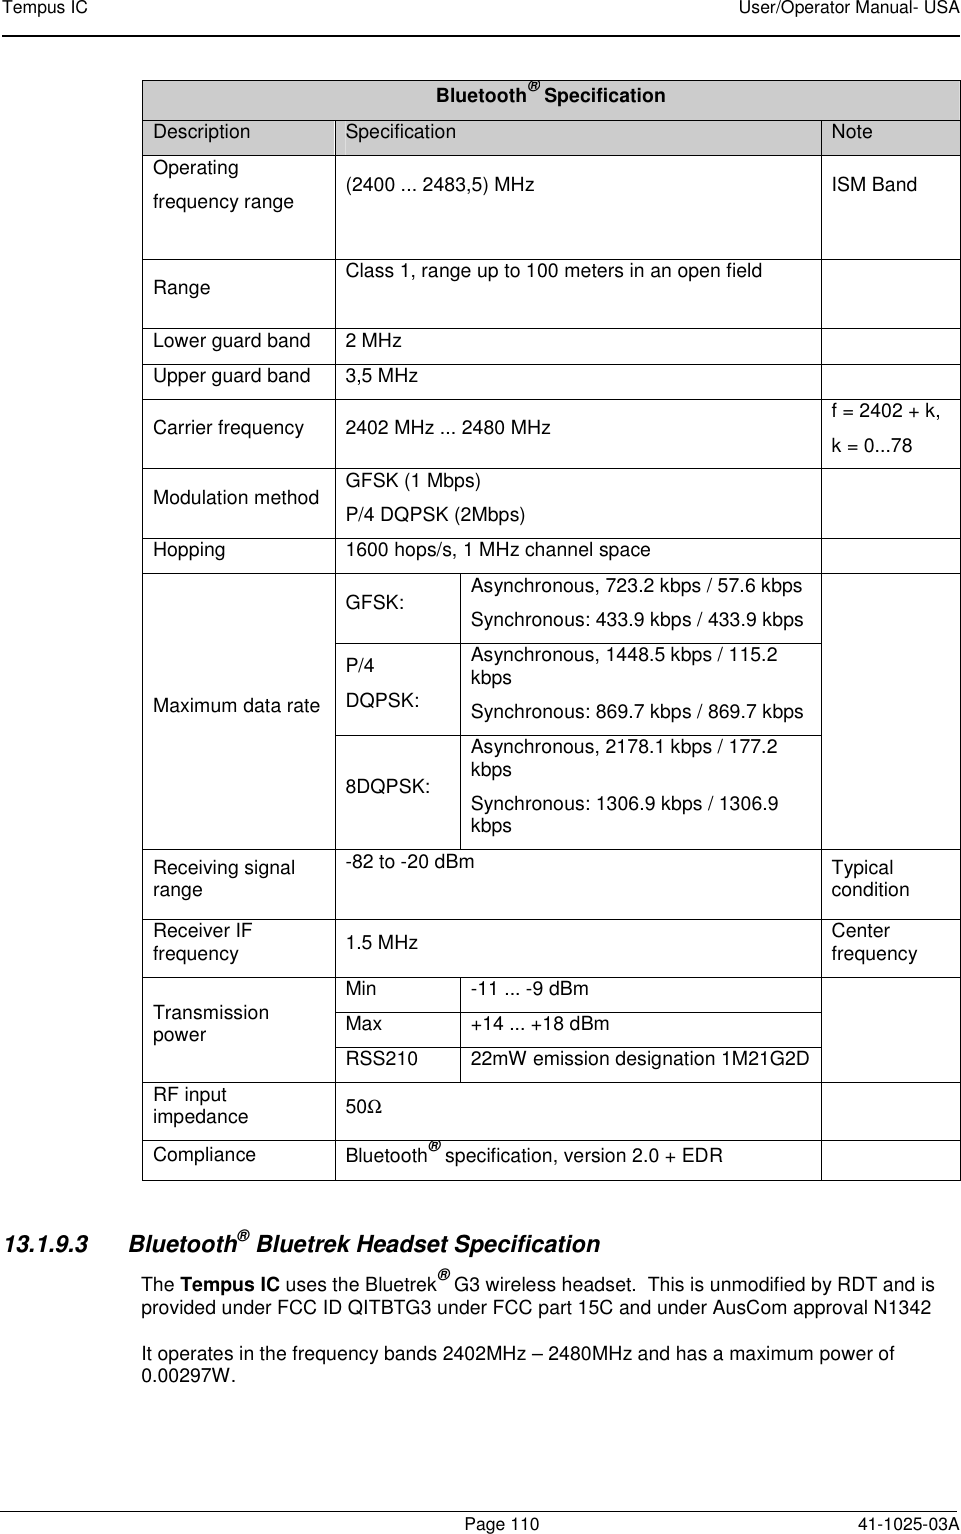 Tempus IC    User/Operator Manual- USA        Page 110   41-1025-03A Bluetooth® Specification Description  Specification  Note Operating frequency range  (2400 ... 2483,5) MHz  ISM Band  Range   Class 1, range up to 100 meters in an open field   Lower guard band  2 MHz   Upper guard band  3,5 MHz   Carrier frequency  2402 MHz ... 2480 MHz  f = 2402 + k, k = 0...78 Modulation method  GFSK (1 Mbps) P/4 DQPSK (2Mbps)   Hopping  1600 hops/s, 1 MHz channel space   Maximum data rate GFSK:  Asynchronous, 723.2 kbps / 57.6 kbps Synchronous: 433.9 kbps / 433.9 kbps  P/4 DQPSK: Asynchronous, 1448.5 kbps / 115.2 kbps Synchronous: 869.7 kbps / 869.7 kbps 8DQPSK: Asynchronous, 2178.1 kbps / 177.2 kbps Synchronous: 1306.9 kbps / 1306.9 kbps Receiving signal range -82 to -20 dBm  Typical condition Receiver IF frequency  1.5 MHz  Center  frequency Transmission power Min  -11 ... -9 dBm  Max  +14 ... +18 dBm RSS210  22mW emission designation 1M21G2D RF input impedance  50Ω  Compliance  Bluetooth® specification, version 2.0 + EDR    13.1.9.3  Bluetooth® Bluetrek Headset Specification The Tempus IC uses the Bluetrek® G3 wireless headset.  This is unmodified by RDT and is provided under FCC ID QITBTG3 under FCC part 15C and under AusCom approval N1342    It operates in the frequency bands 2402MHz – 2480MHz and has a maximum power of 0.00297W.     